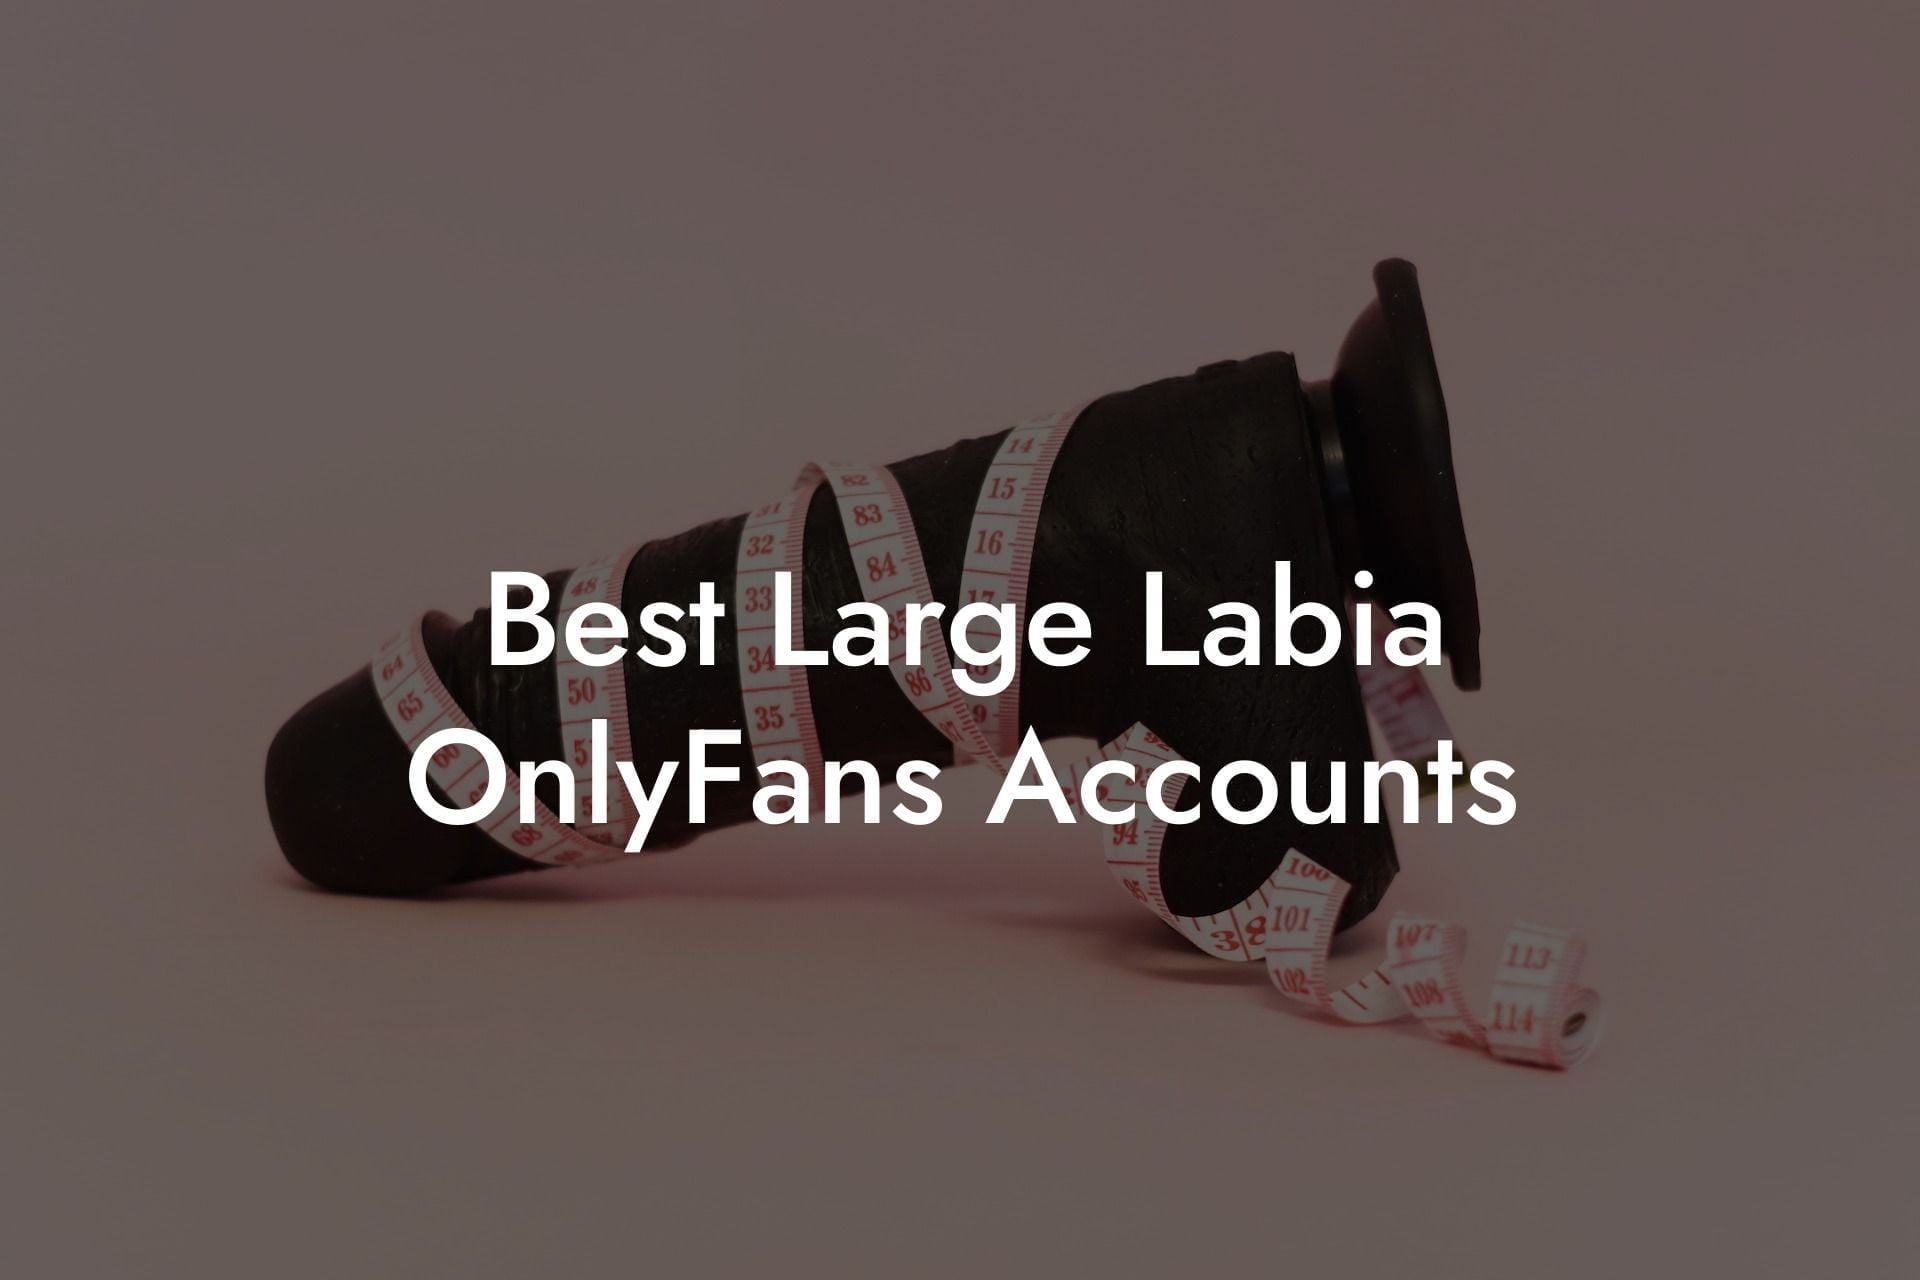 Best Large Labia OnlyFans Accounts